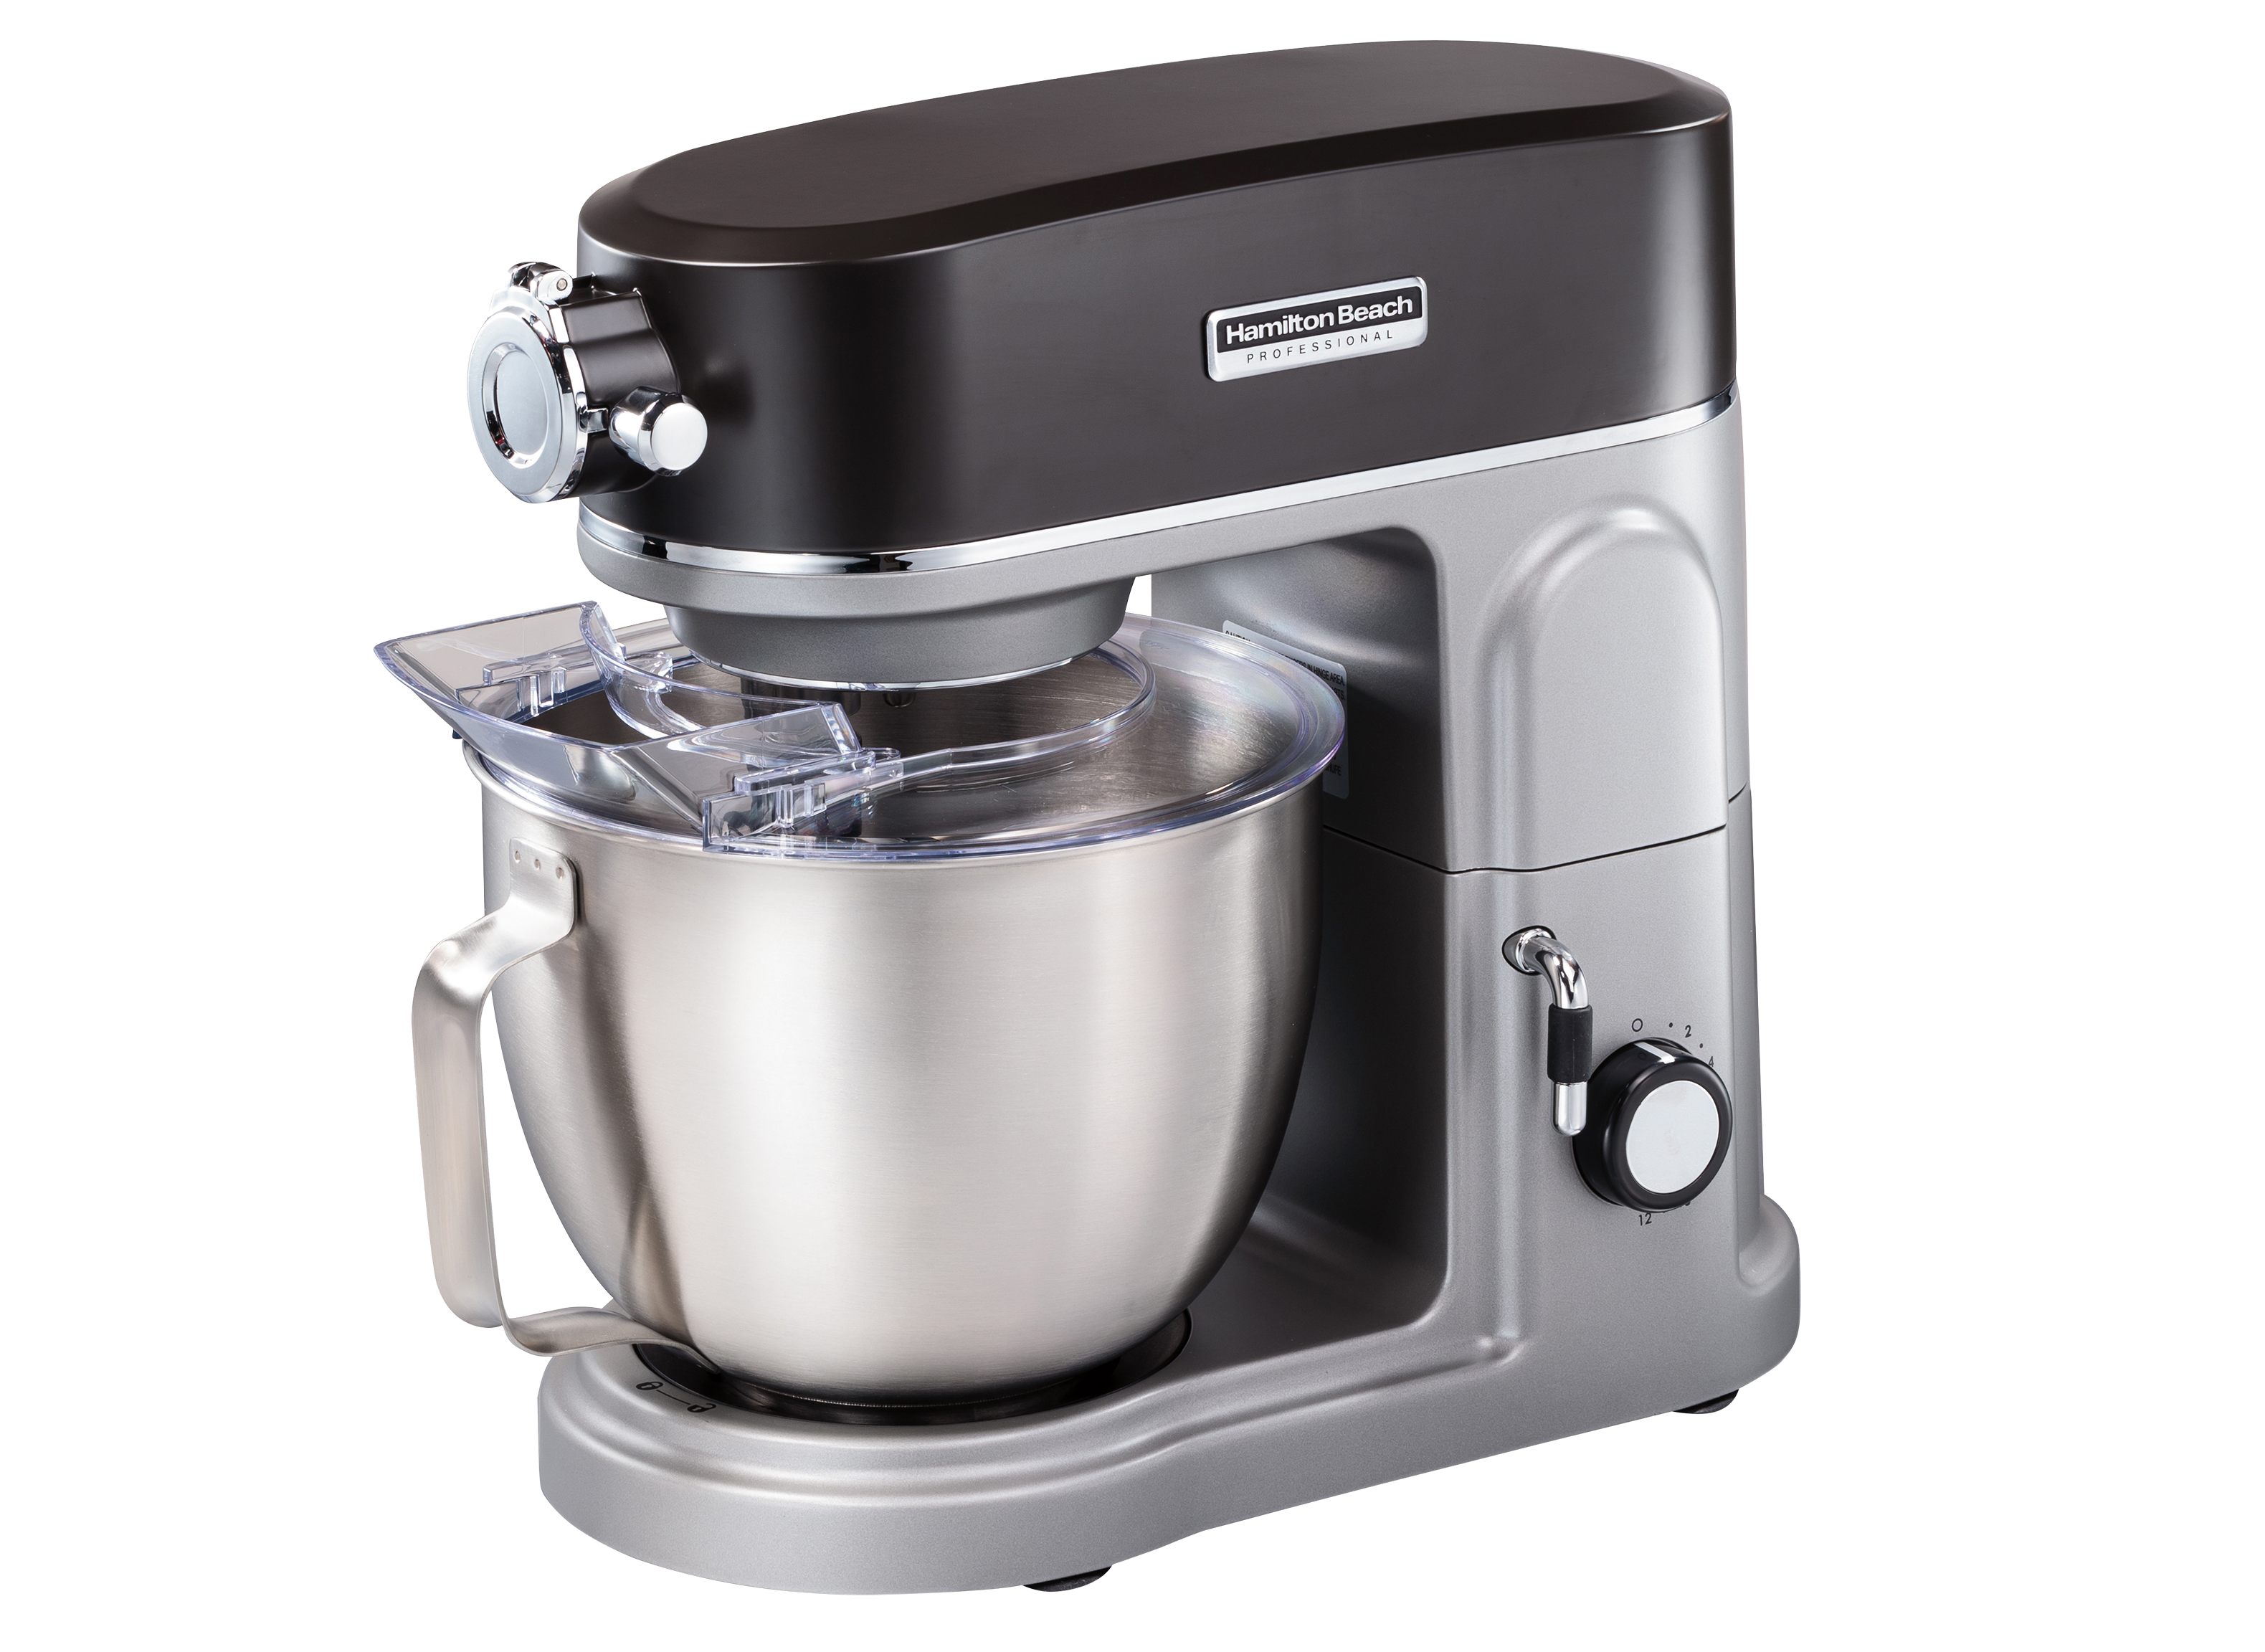 https://crdms.images.consumerreports.org/prod/products/cr/models/406955-stand-mixers-hamilton-beach-professional-all-metal-63240-10030117.png